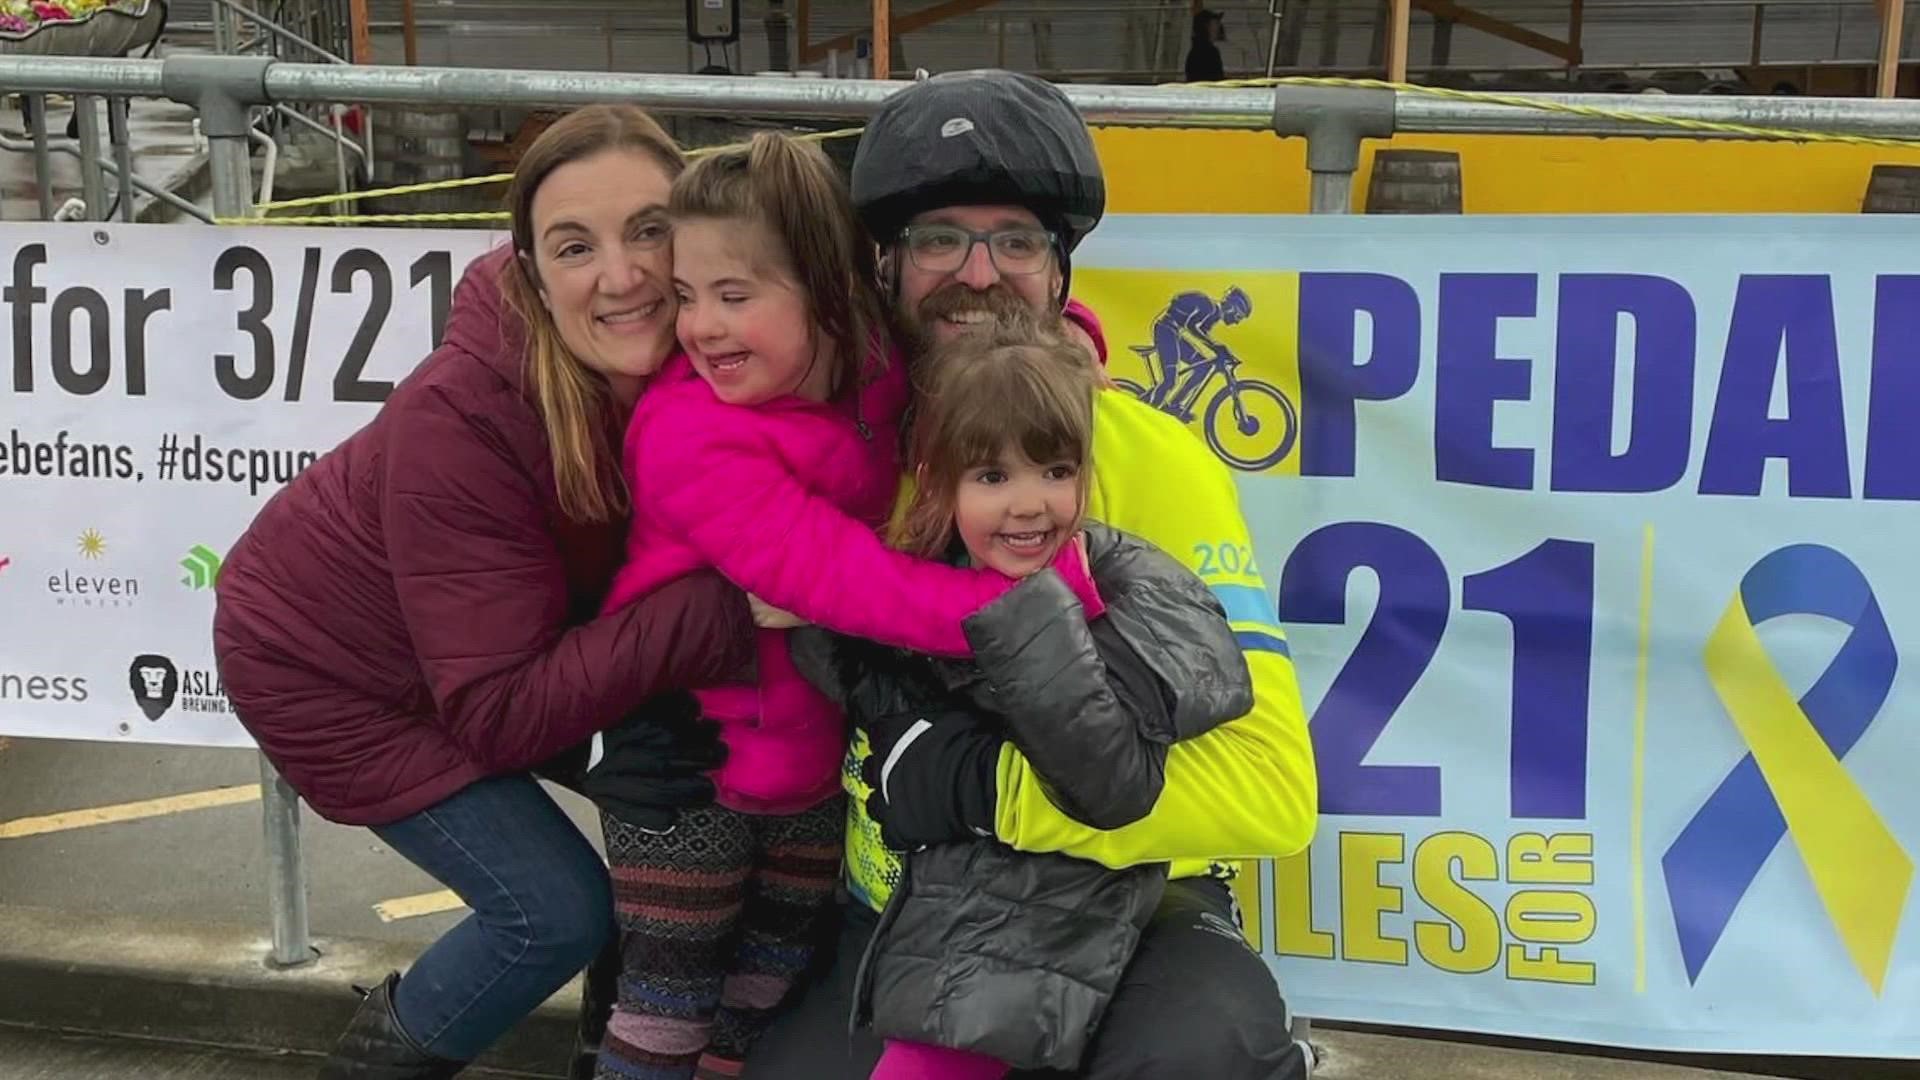 Matt Lyman will end his bike ride in Portland on March 21. The effort is intended to raise awareness for Down Syndrome Community of Puget Sound.